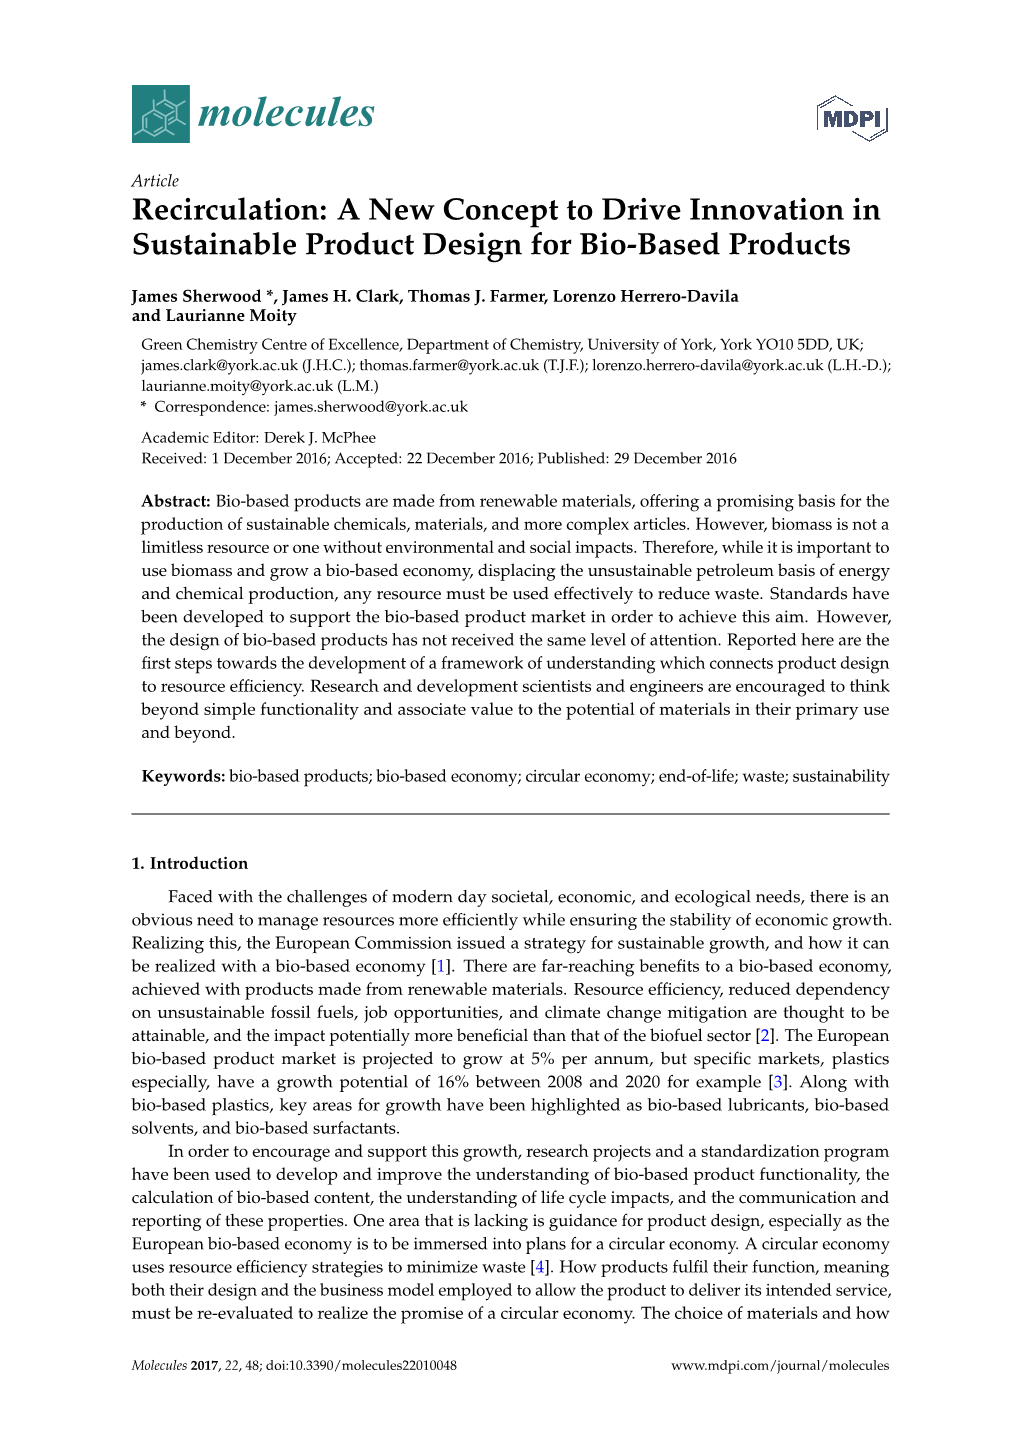 A New Concept to Drive Innovation in Sustainable Product Design for Bio-Based Products